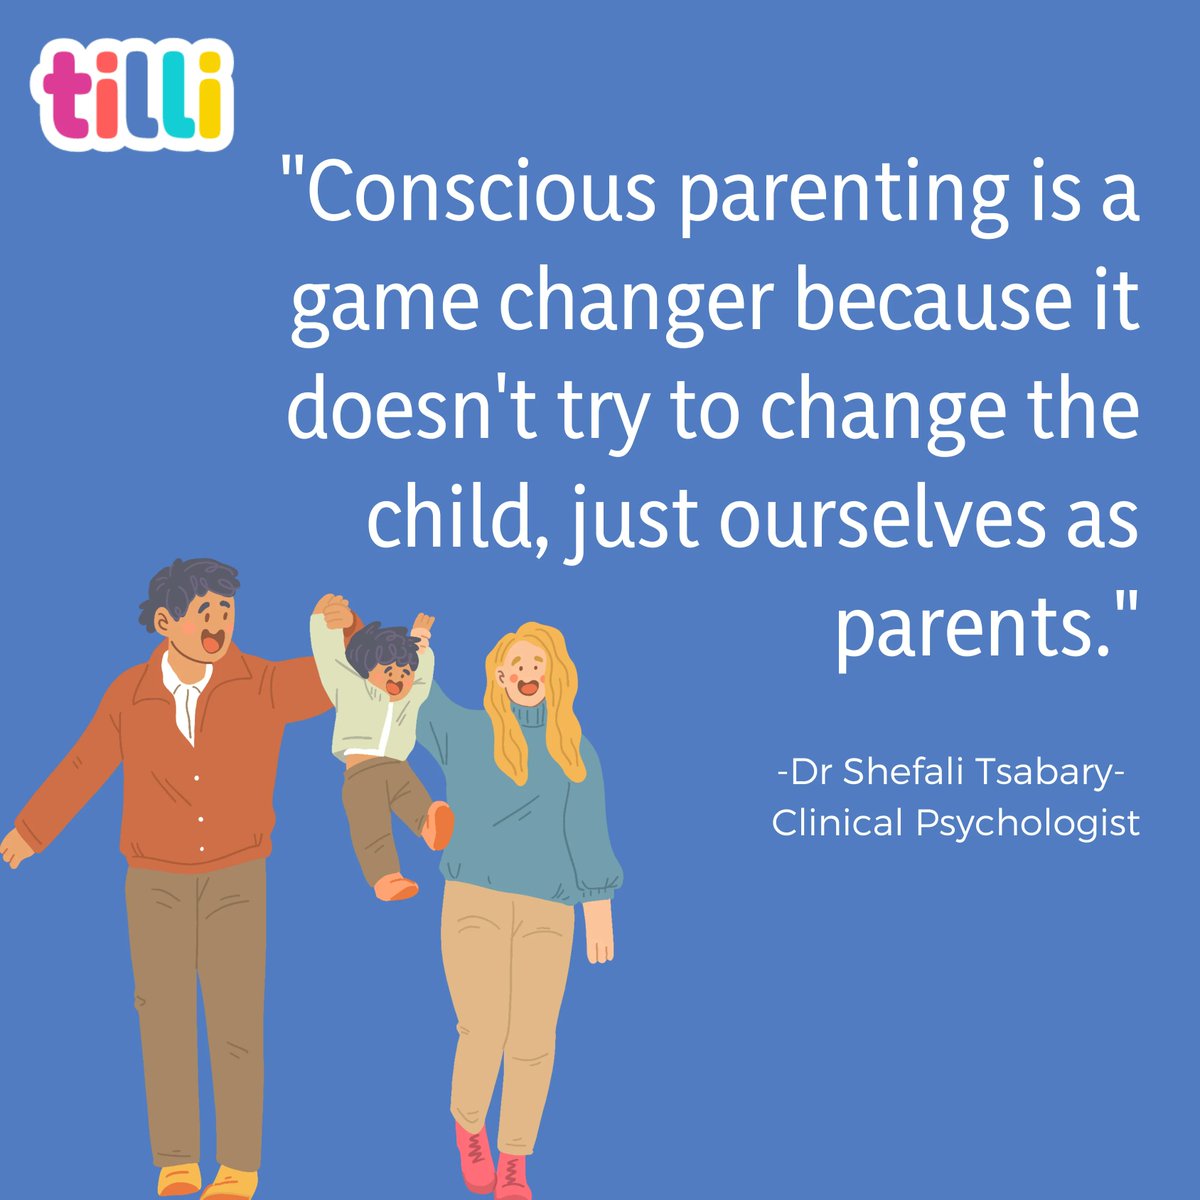 Conscious parenting is about focusing on changing ourselves as parents, rather than trying to change our children. 🙌 

#ConsciousParenting #MindfulParenting #ParentingAdvice #PositiveParenting #PersonalGrowth #ChildrensWellbeing #HealthyFamilies  #Tilli